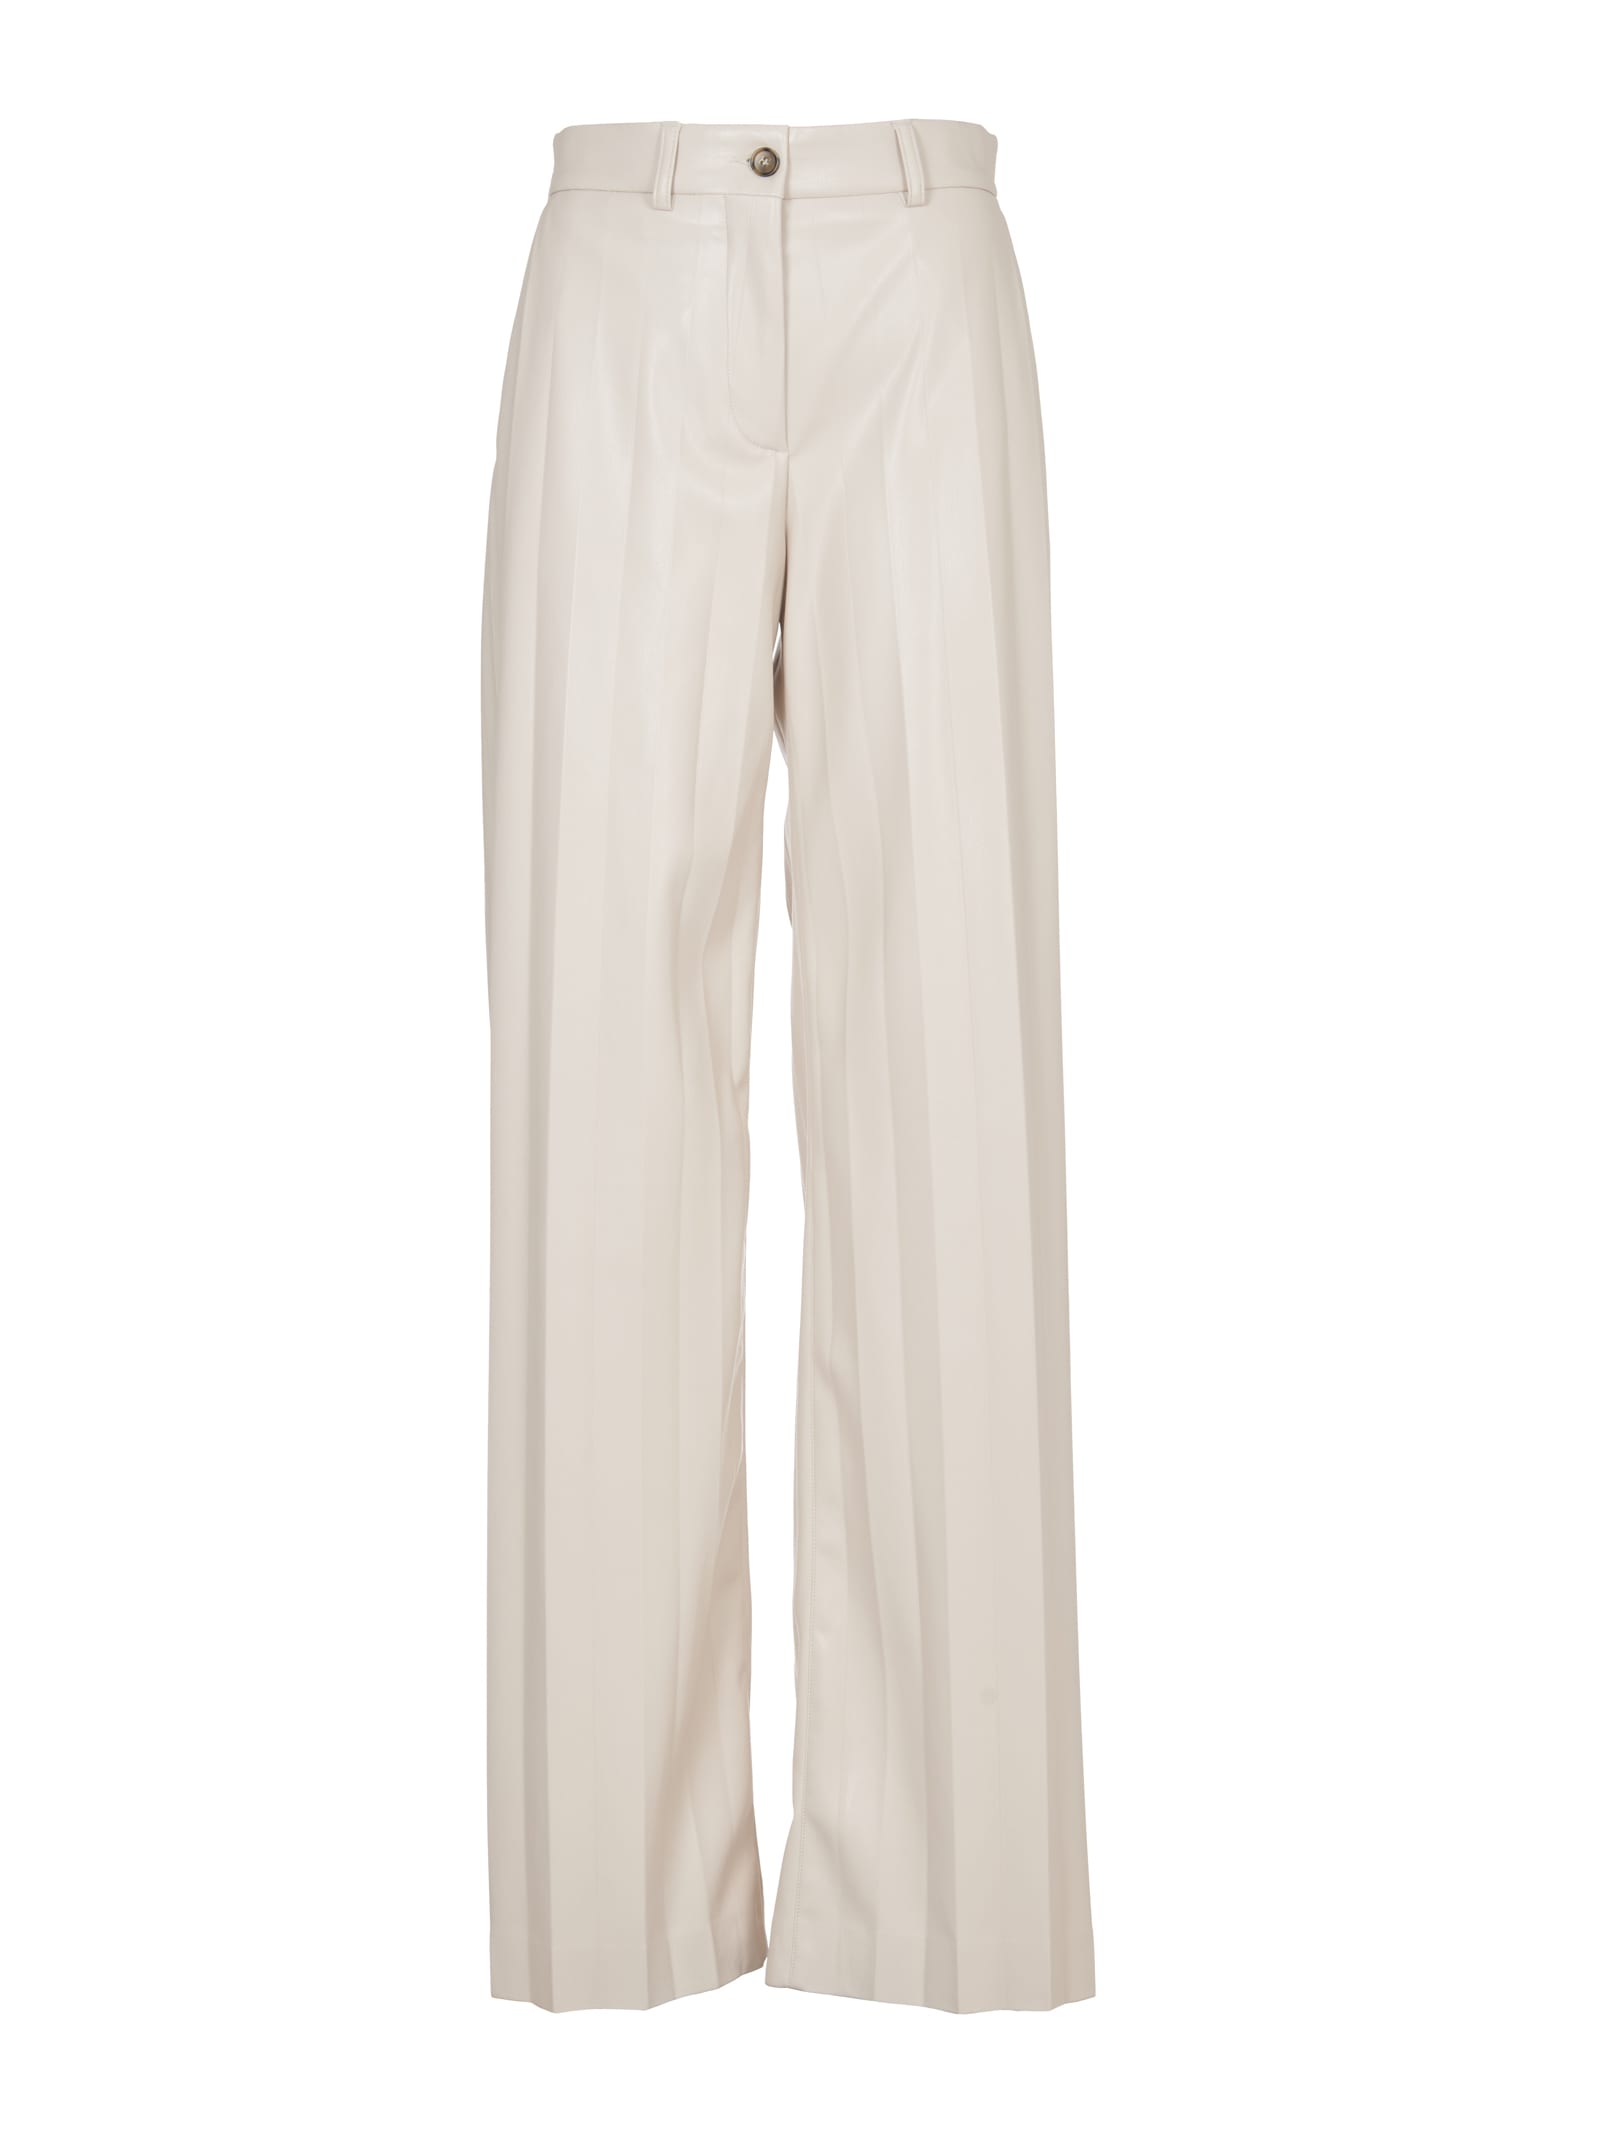 MSGM White Pleated Palazzo Trousers